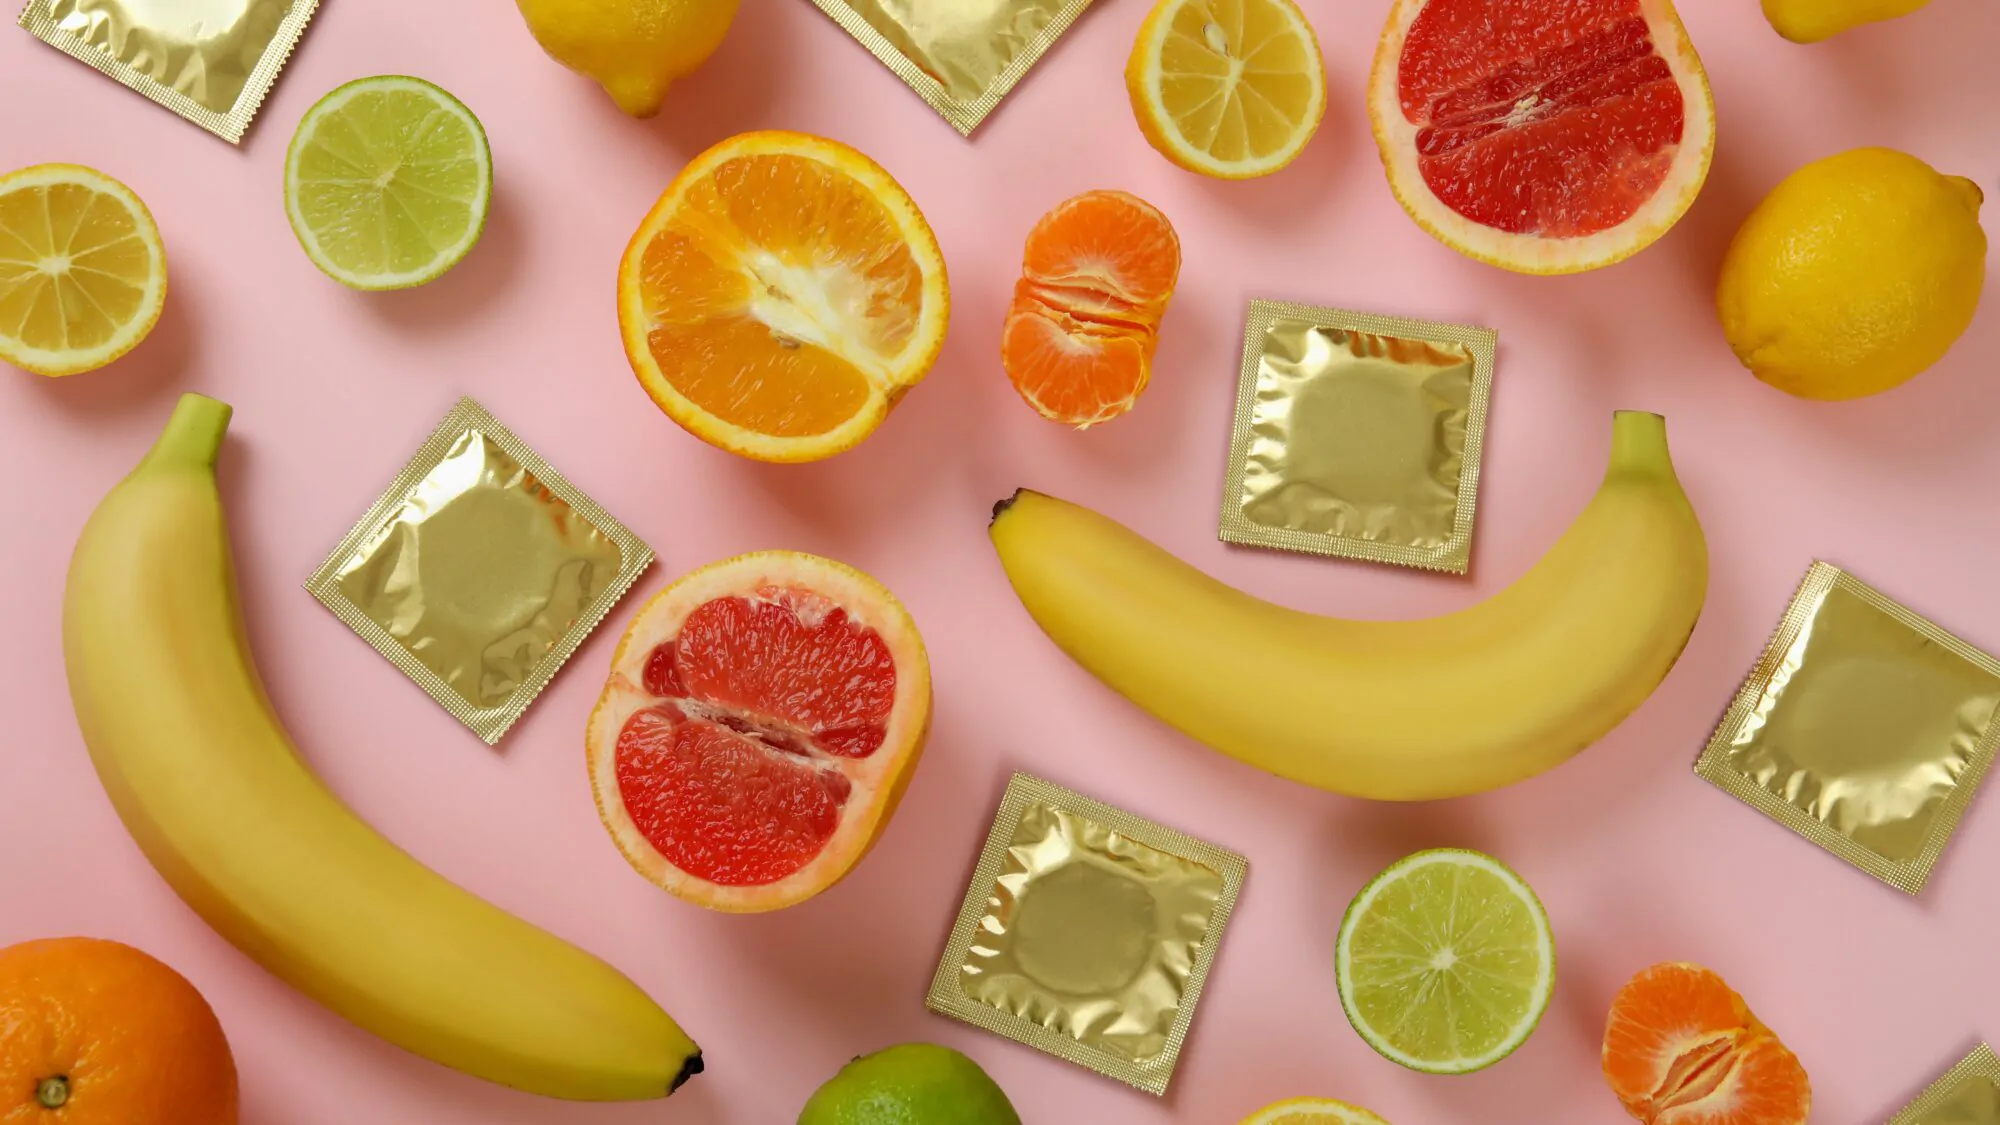 Sex concept with fruits and condoms on pink background